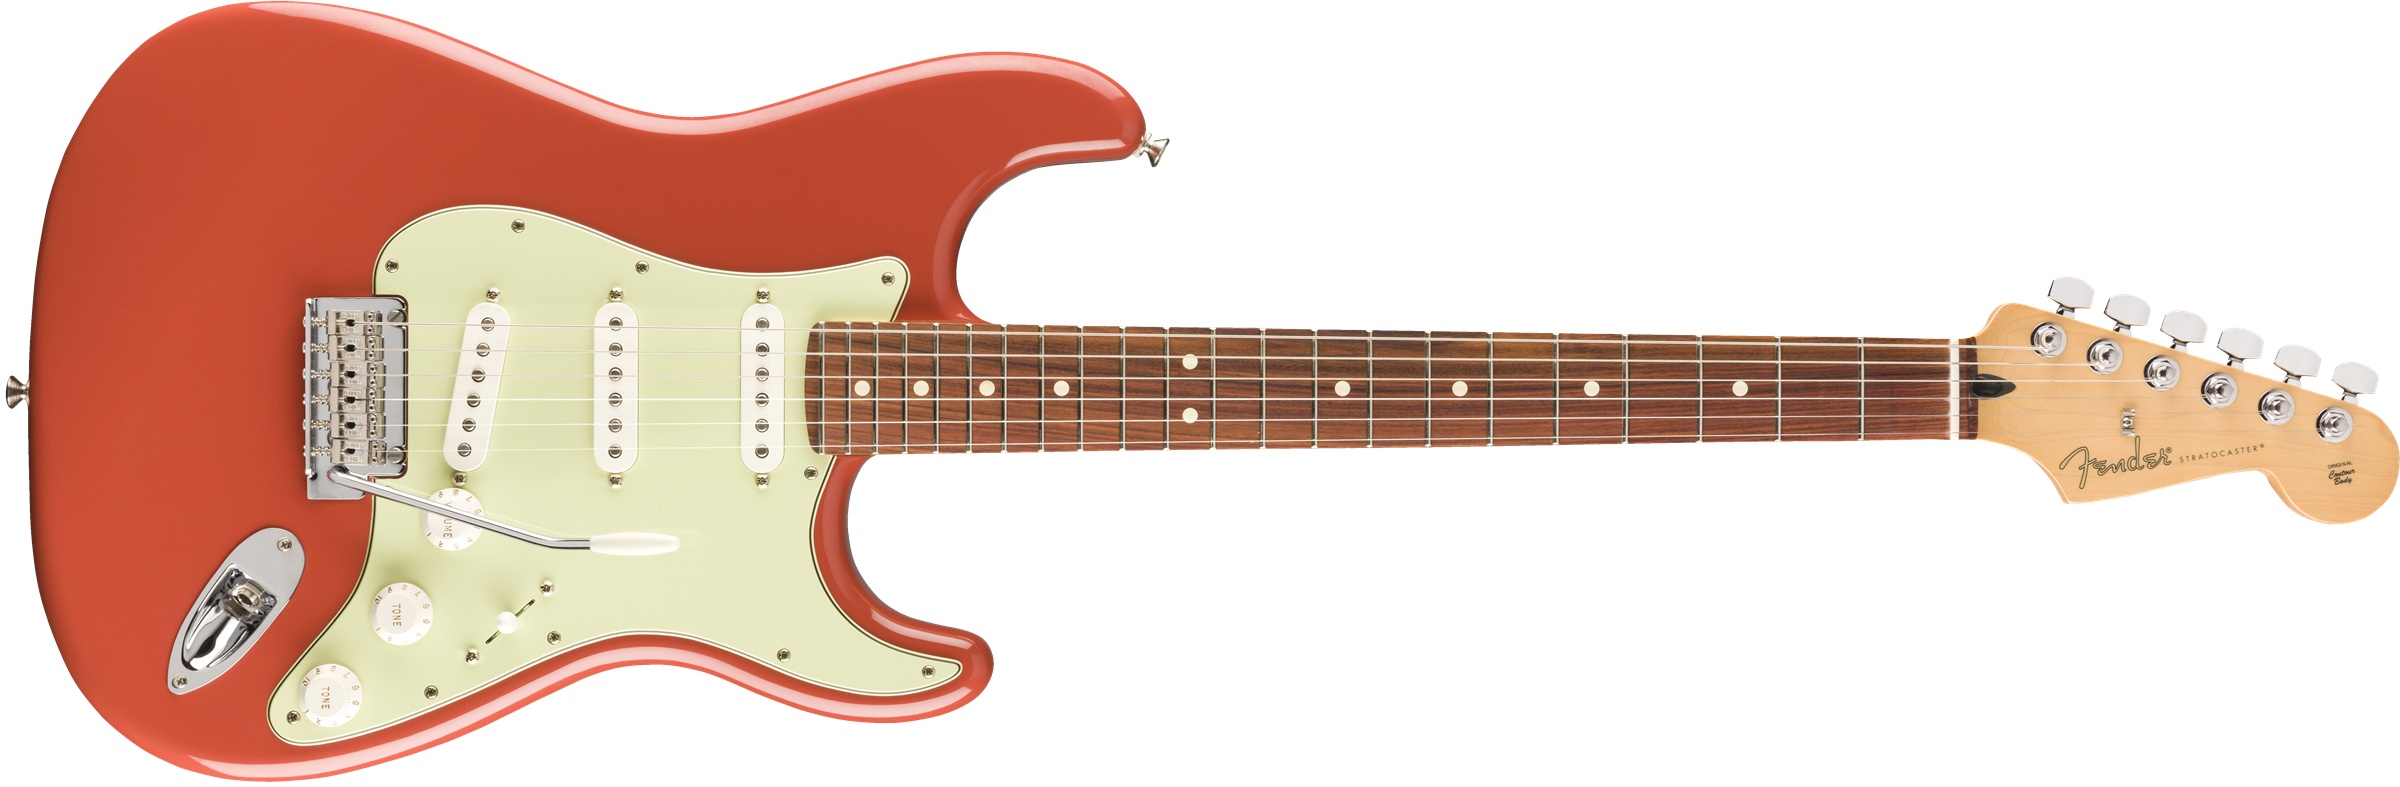 Fender Limited Edition Player Stratocaster Fiesta Red 0144503540